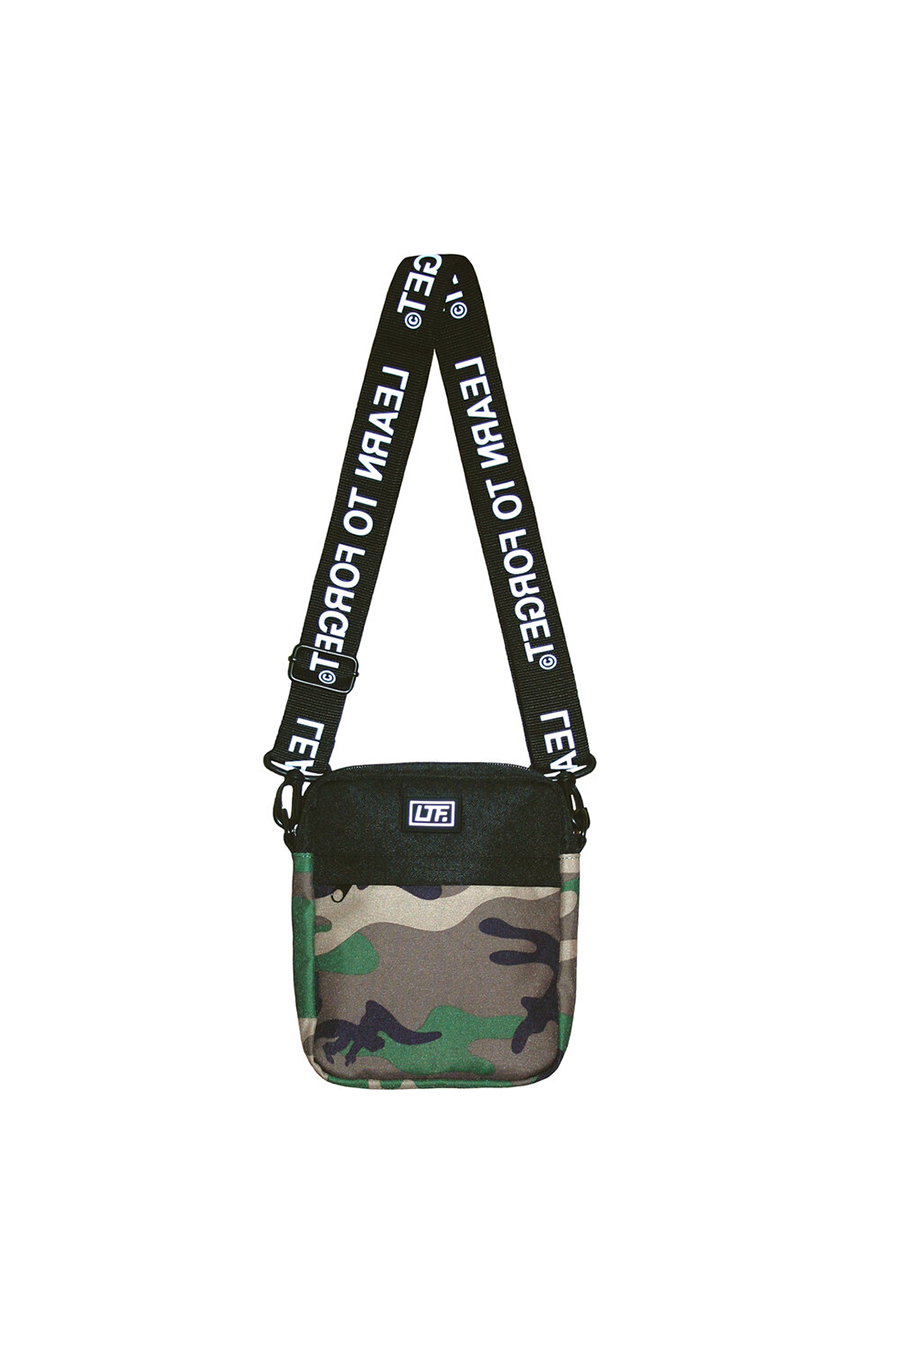 Downtown Side Bag | Camo - Main Image Number 1 of 1